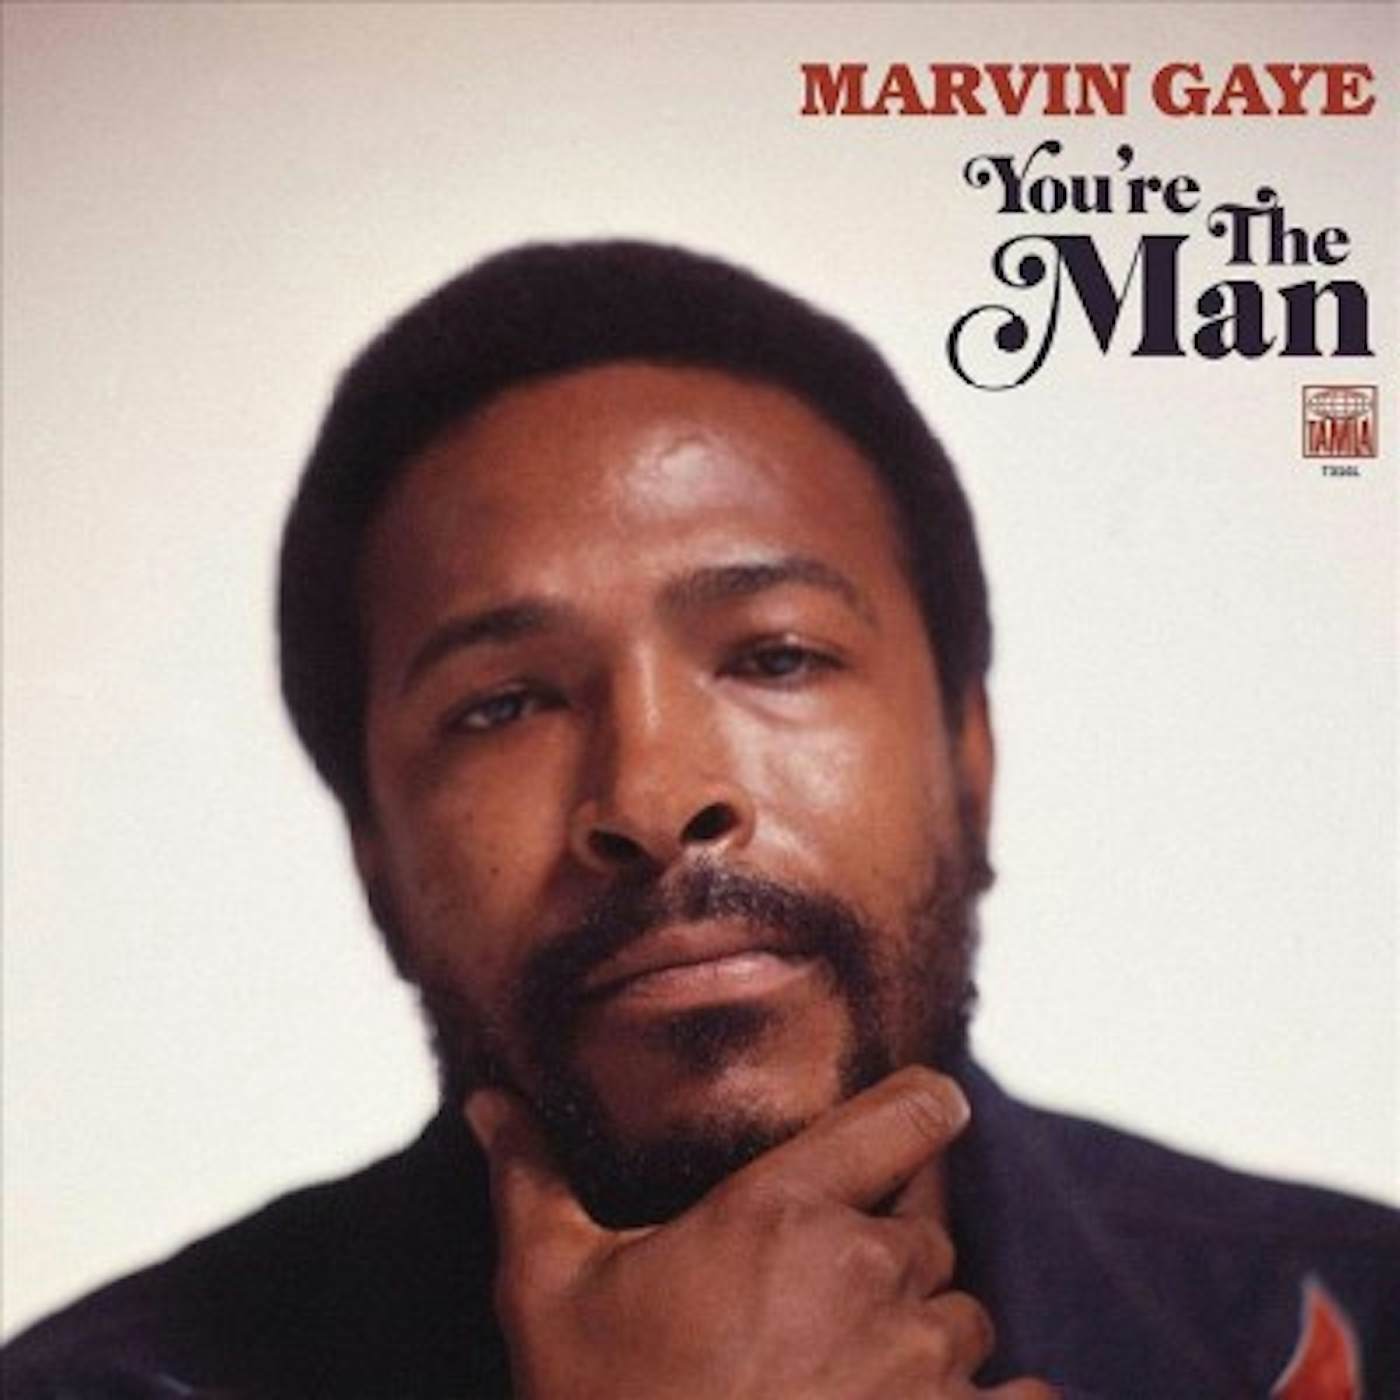 Marvin Gaye What's Going On Vinyl Record 